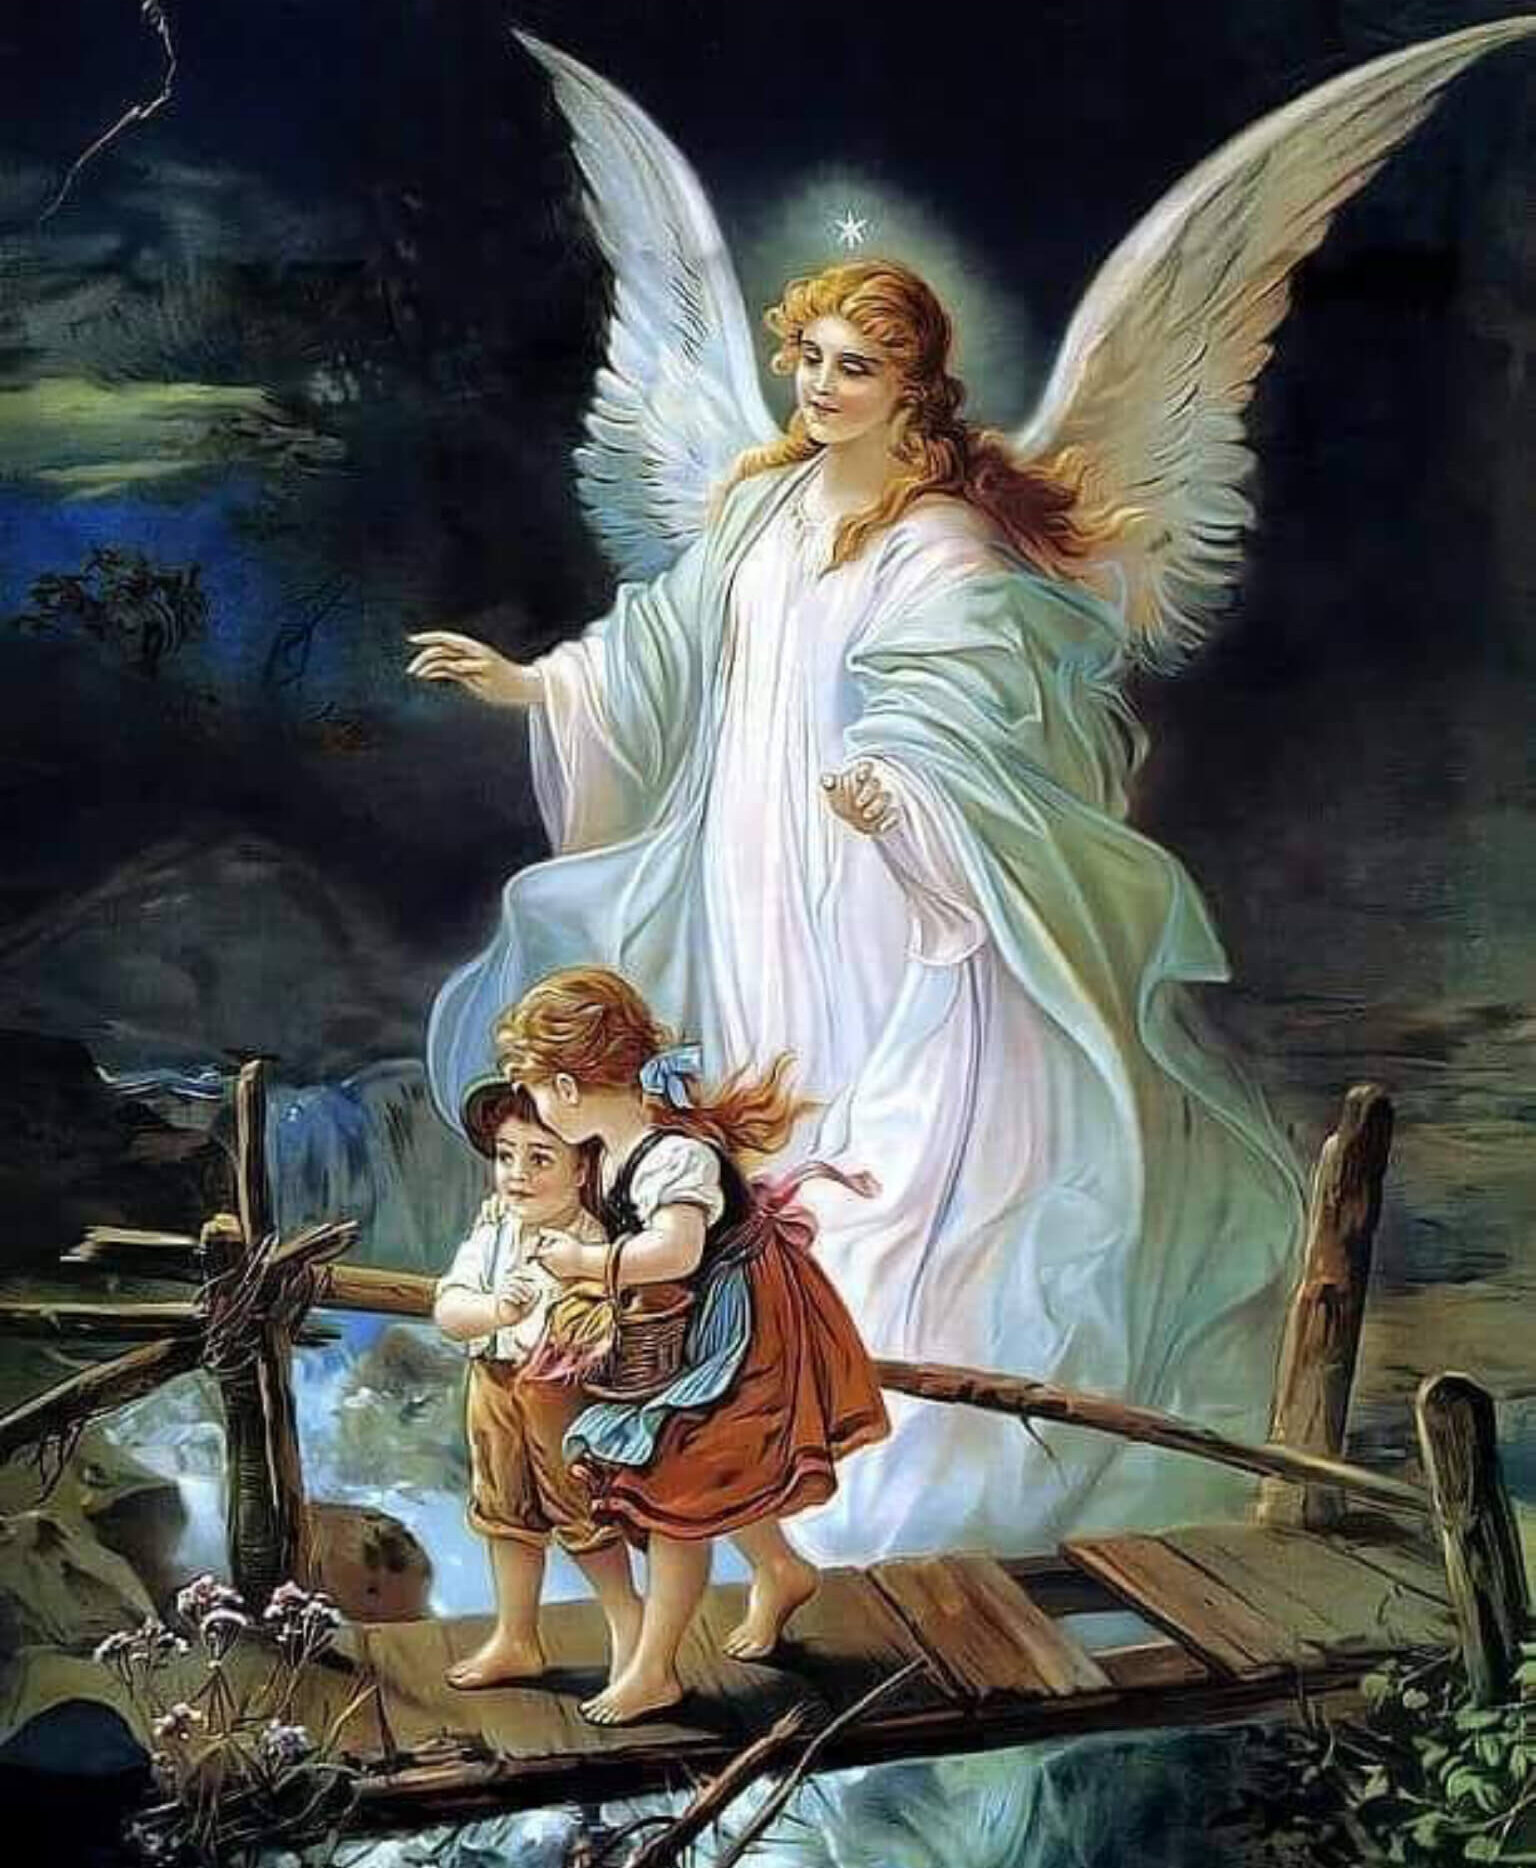 Guardian angels are always by our side and help us